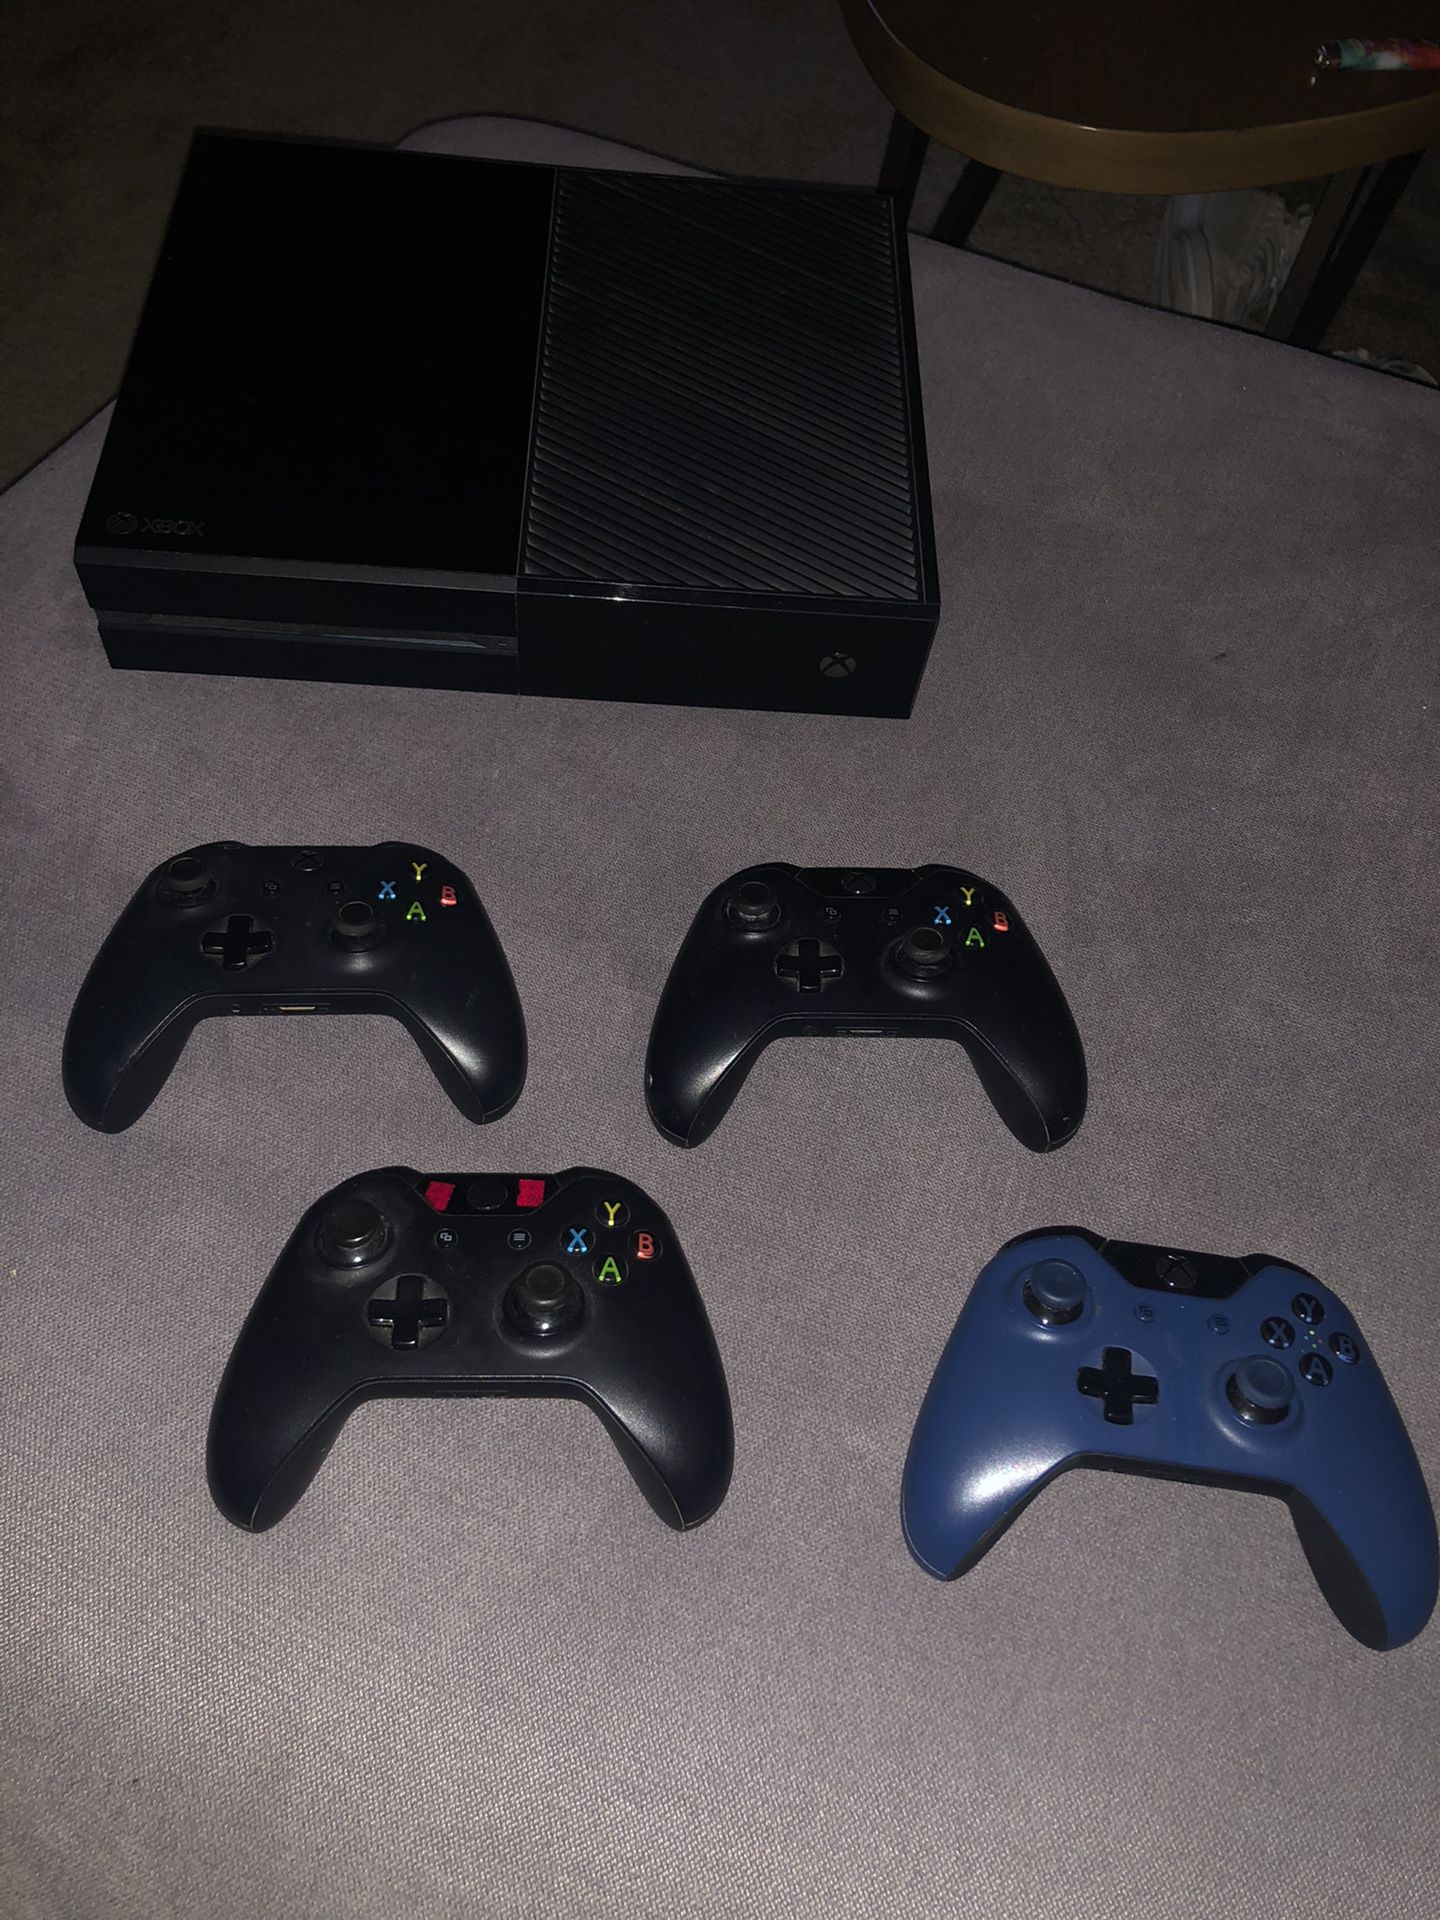 Xbox One w/ 4 controllers